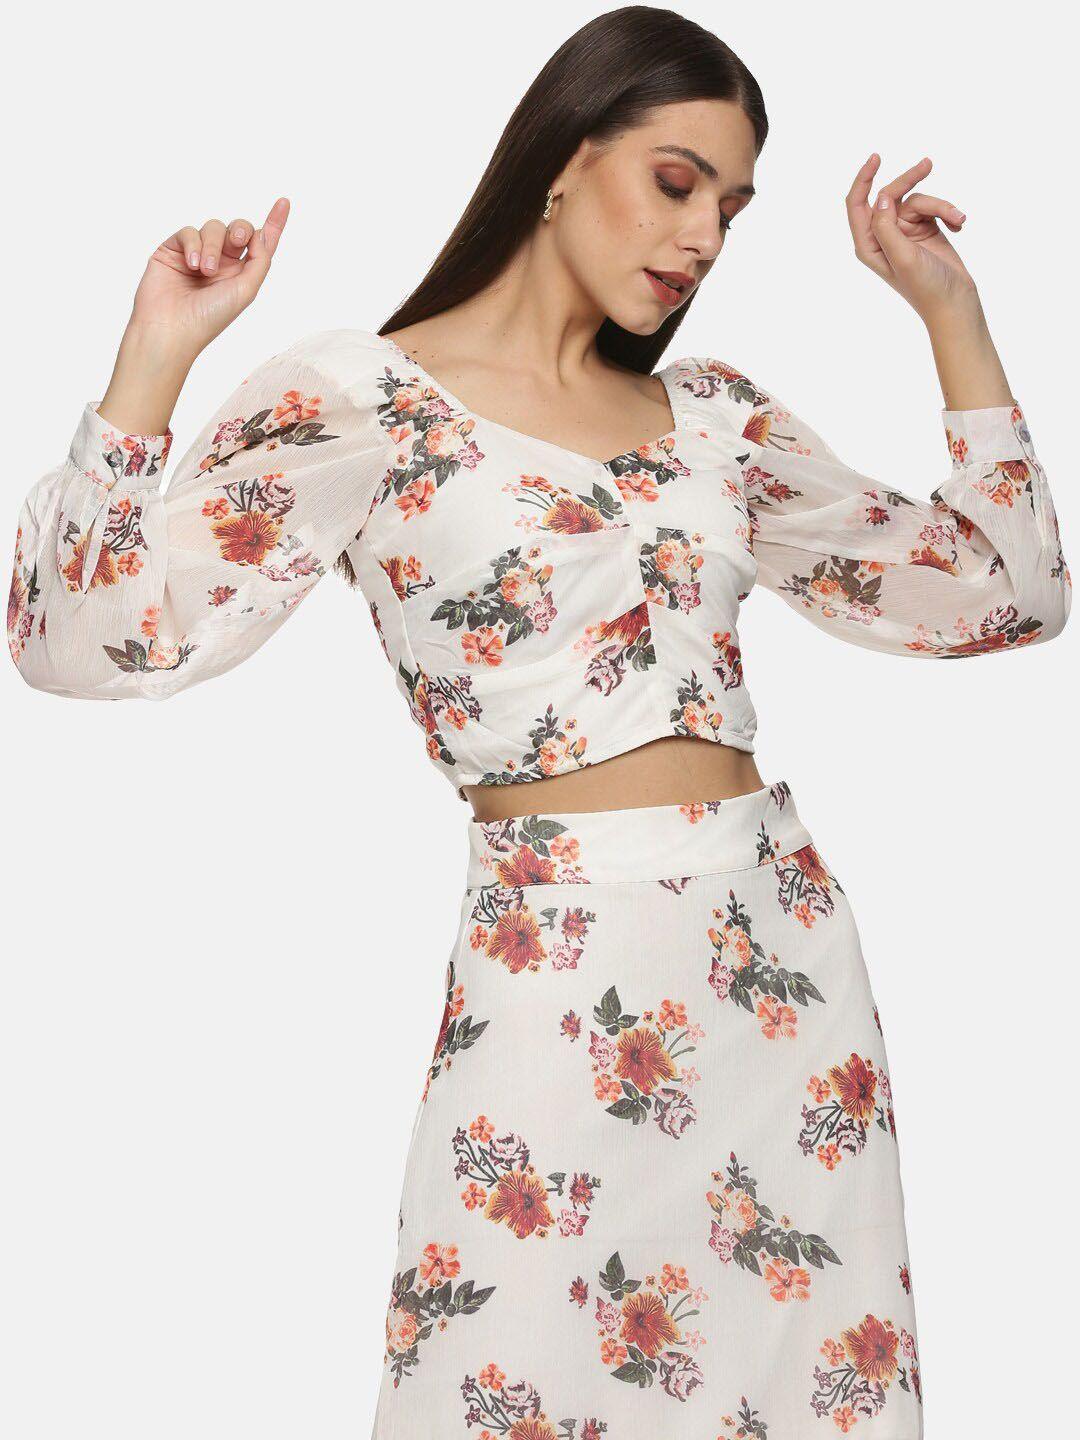 here&now floral print chiffon crop top